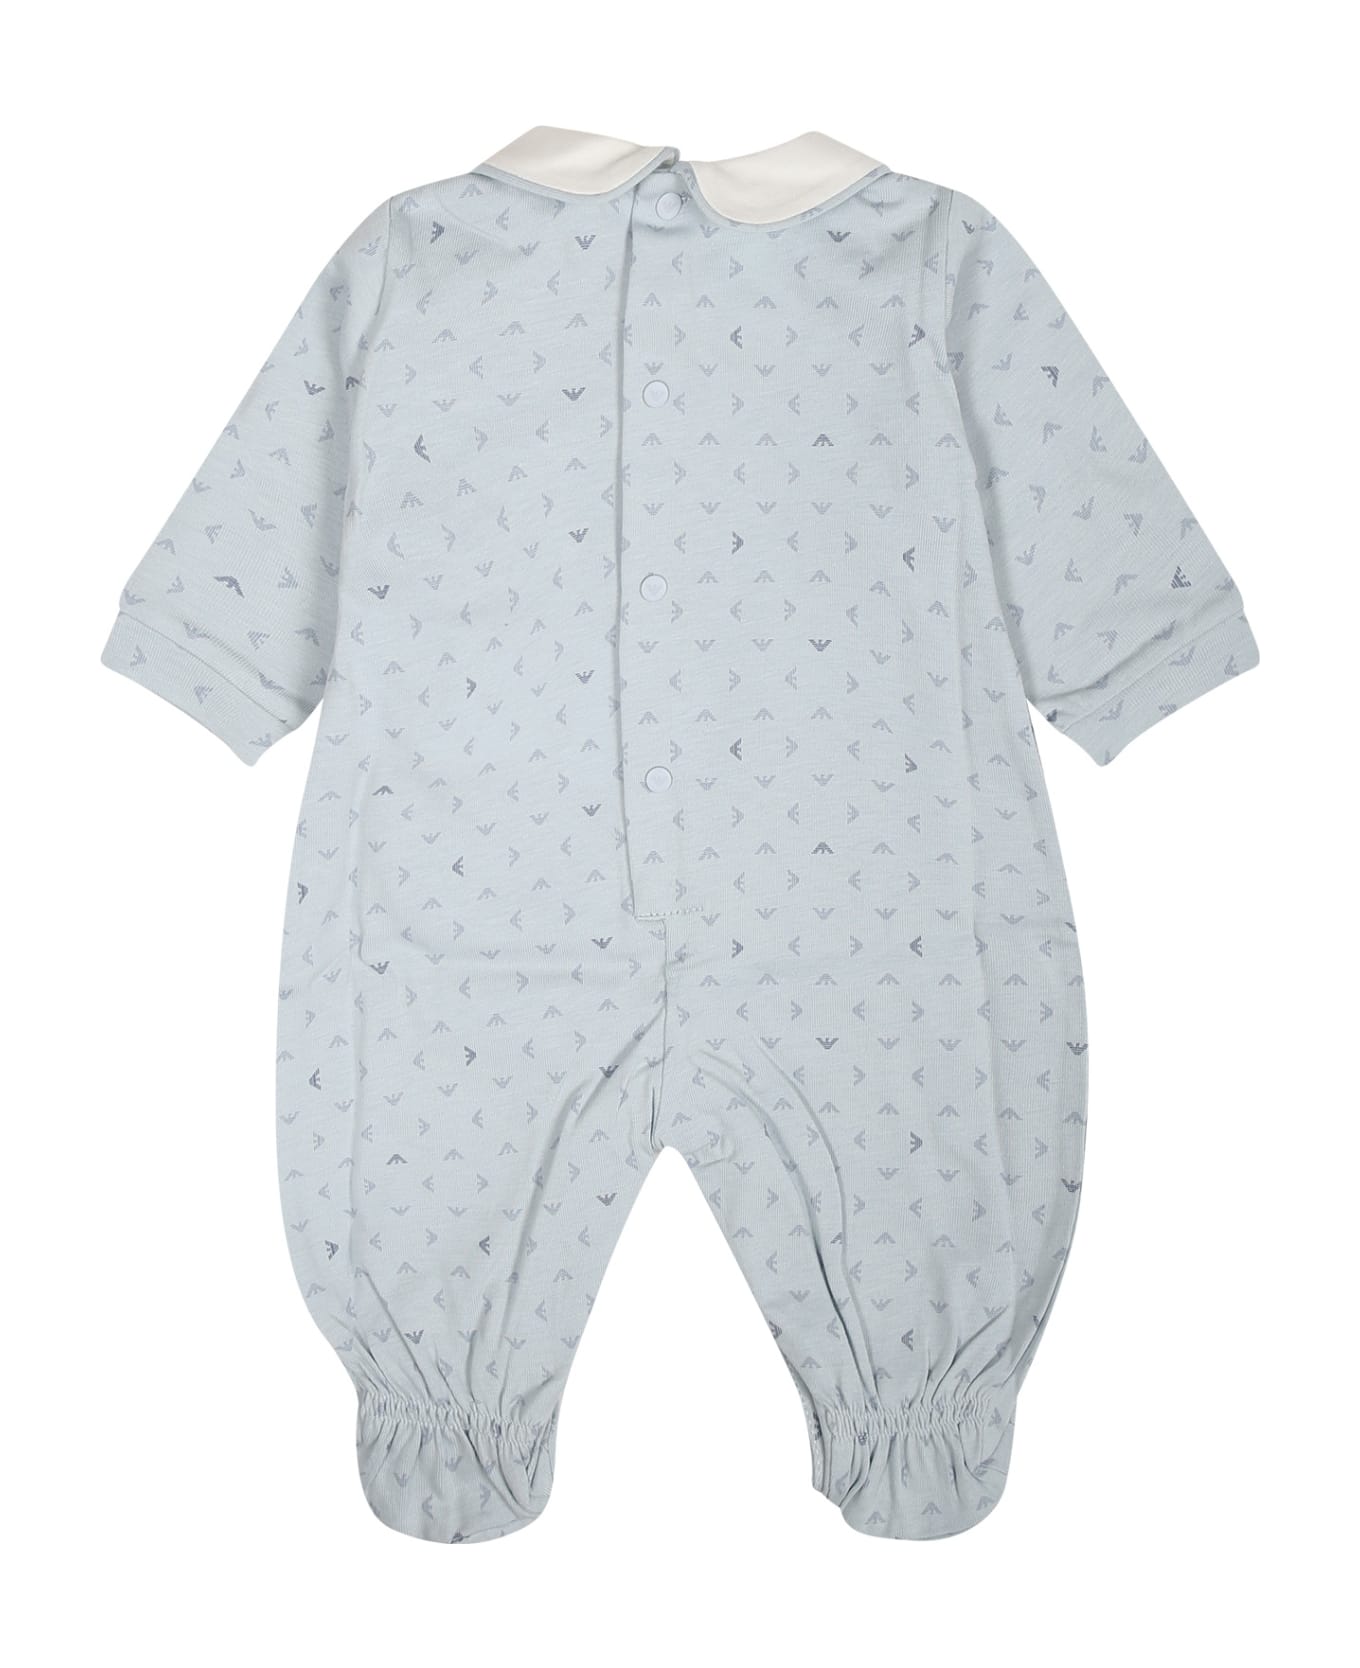 Emporio Armani Light Blue Playsuit For Baby Boy With All-over Eagle Logo - Light Blue